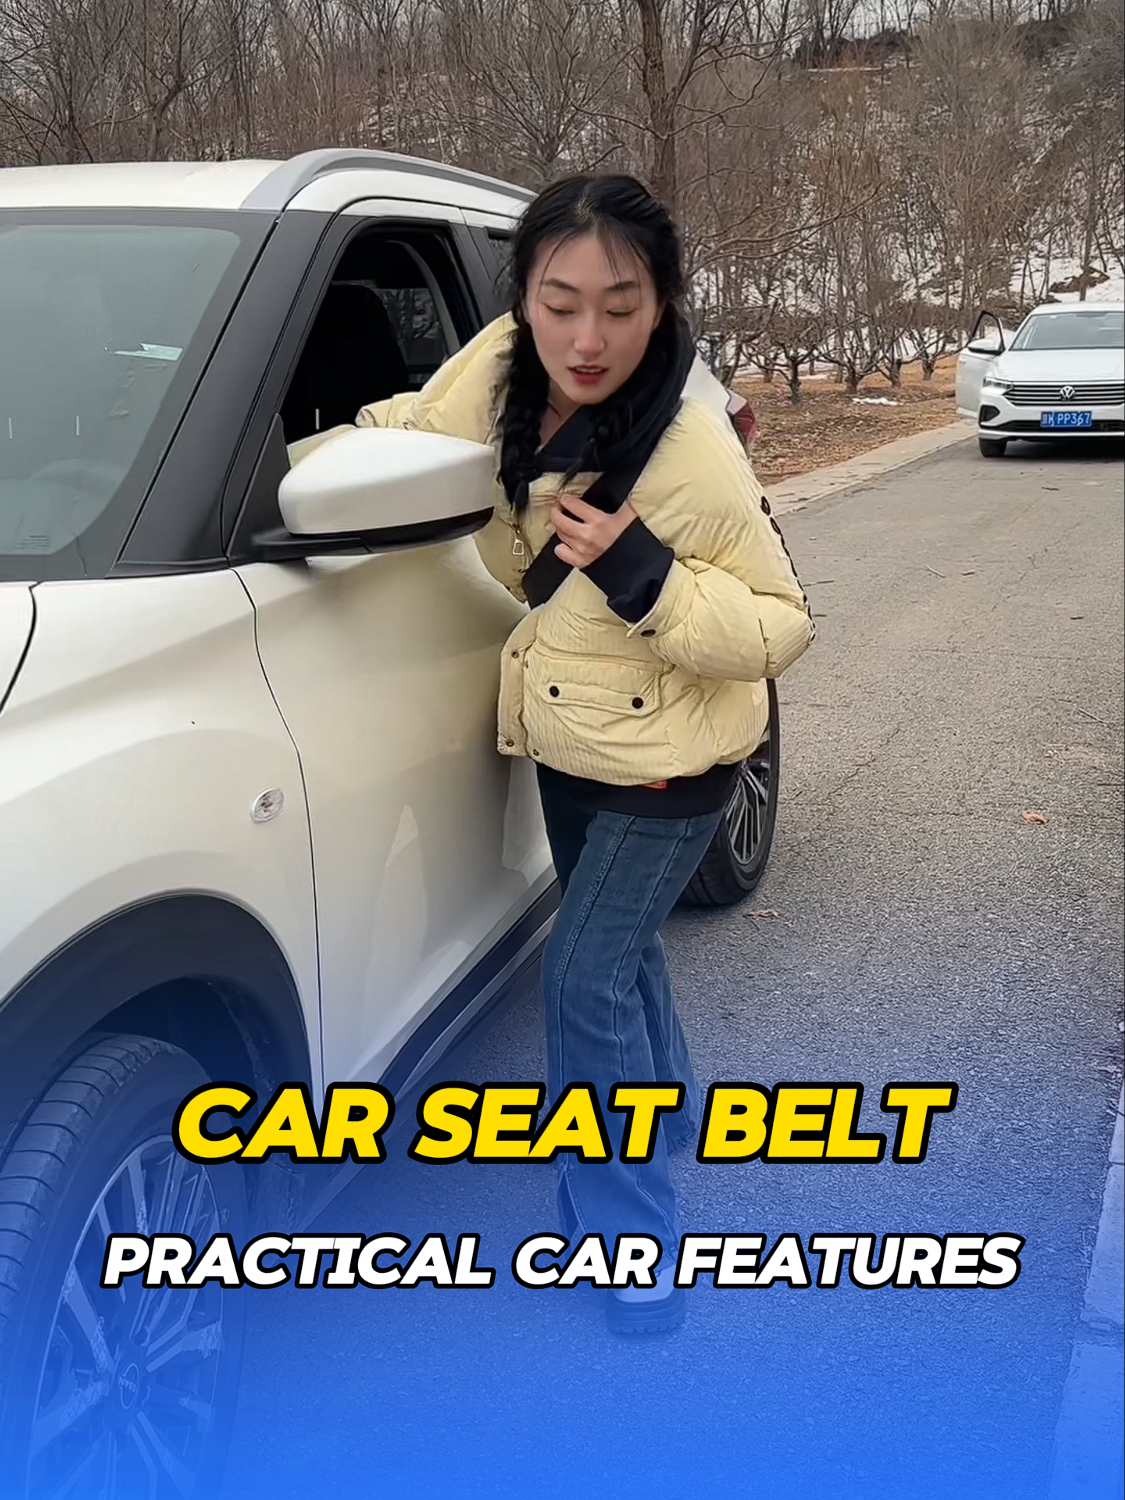 Practical functions of car seat belts #skill#carsafety#parking#car#automobile#seatbelts